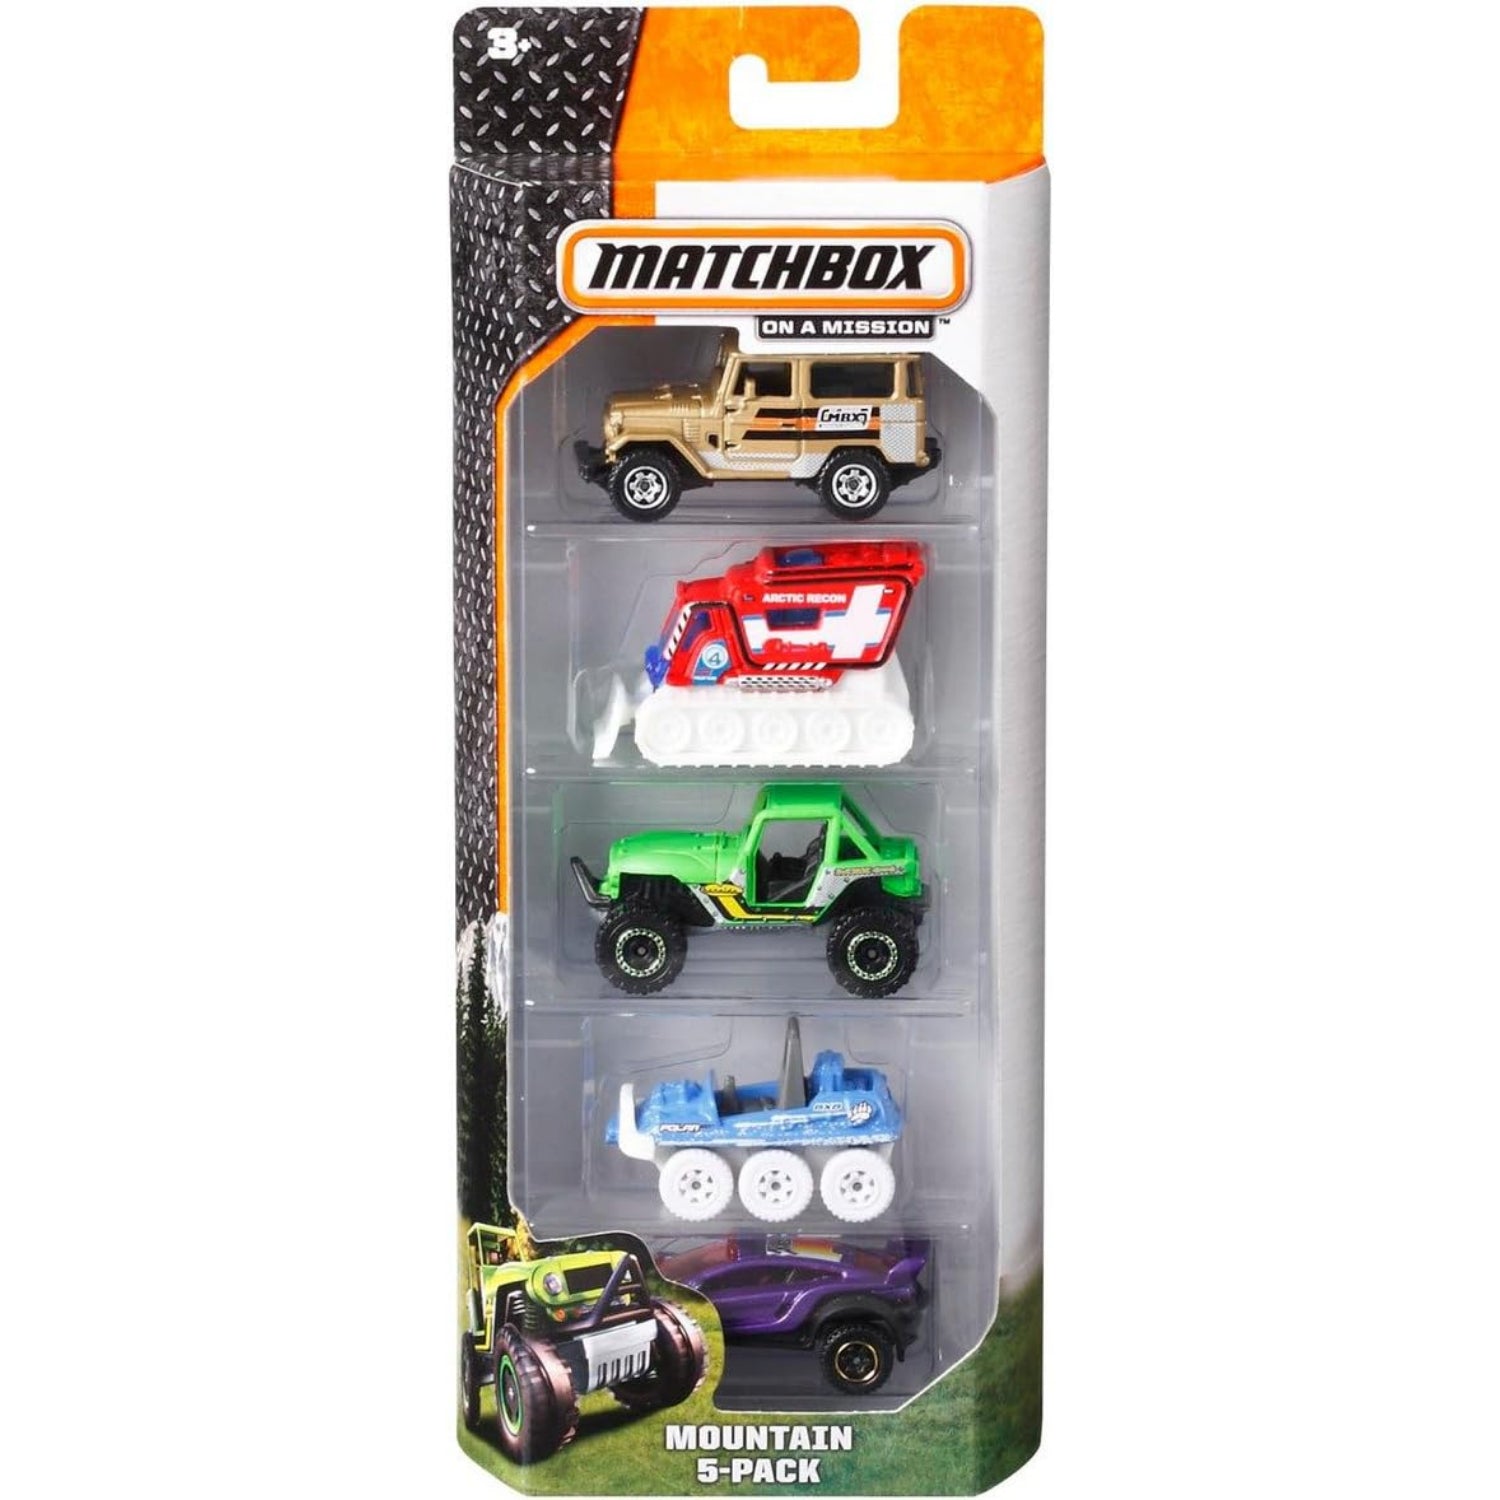 Mattel Matchbox 5-Pack of 1:64 Scale Vehicles, 5 Toy Car 